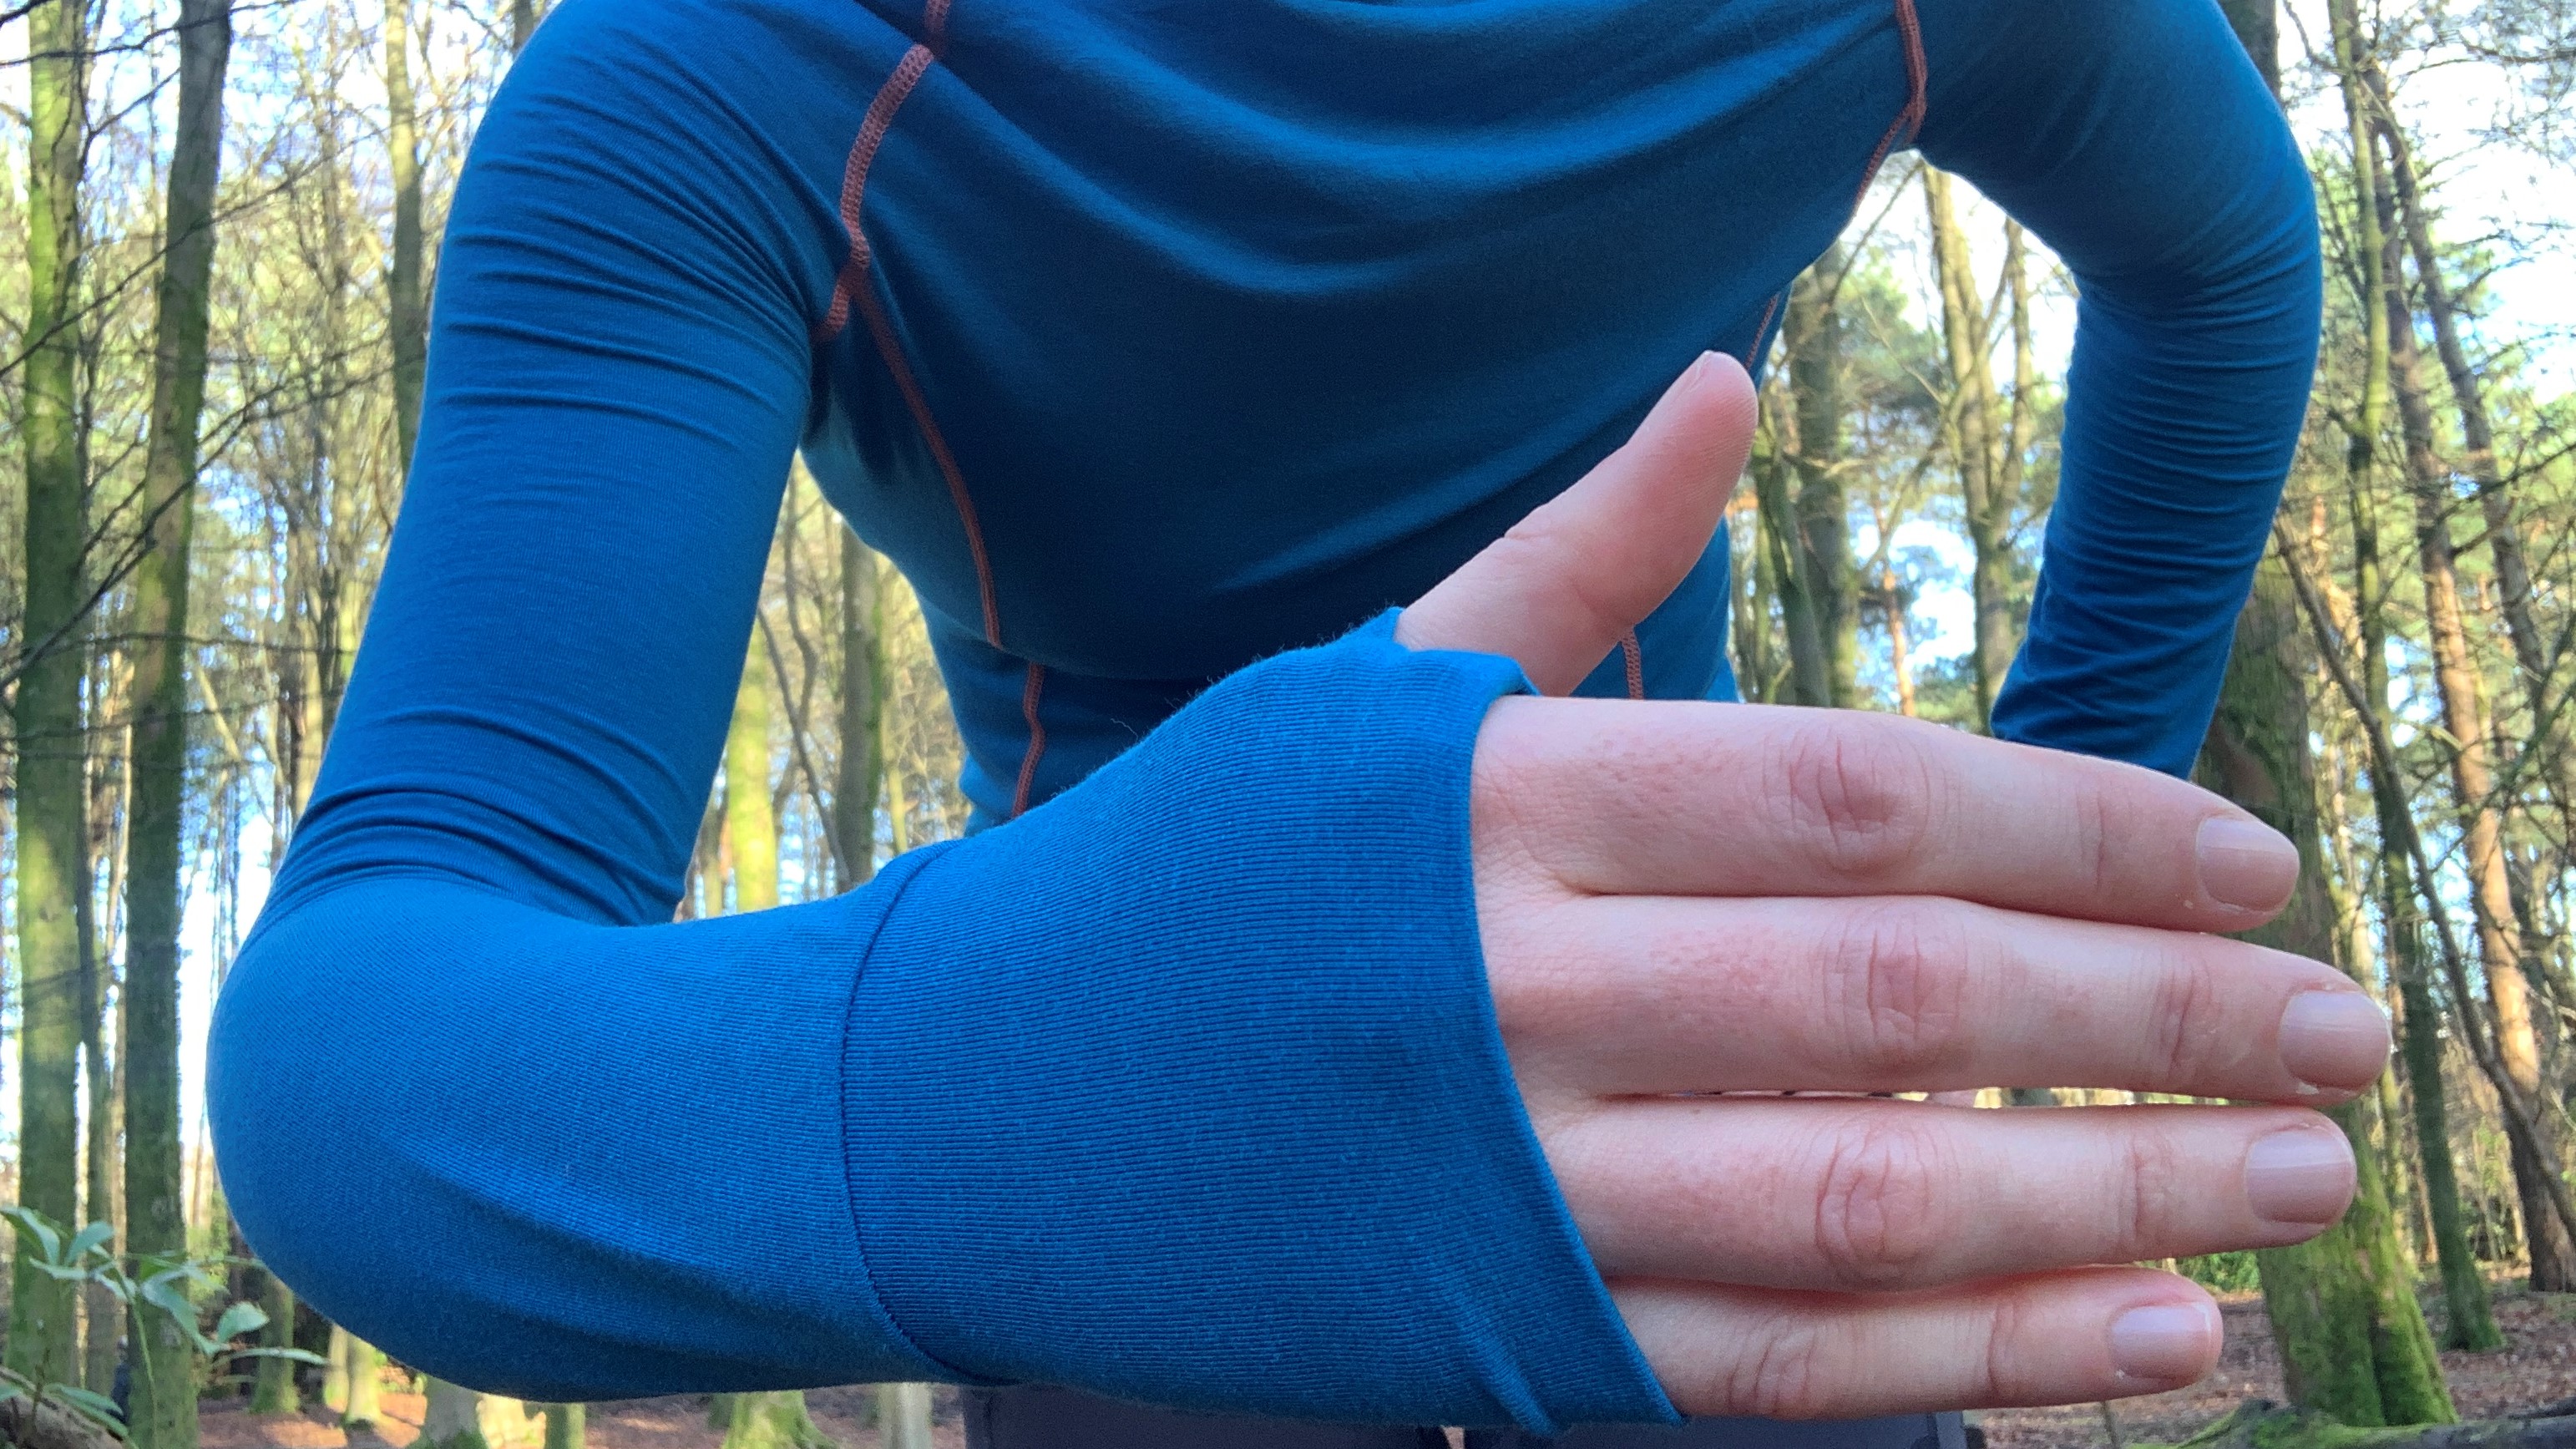 Thumb holes: outdoor gear necessity or marketing gimmick?